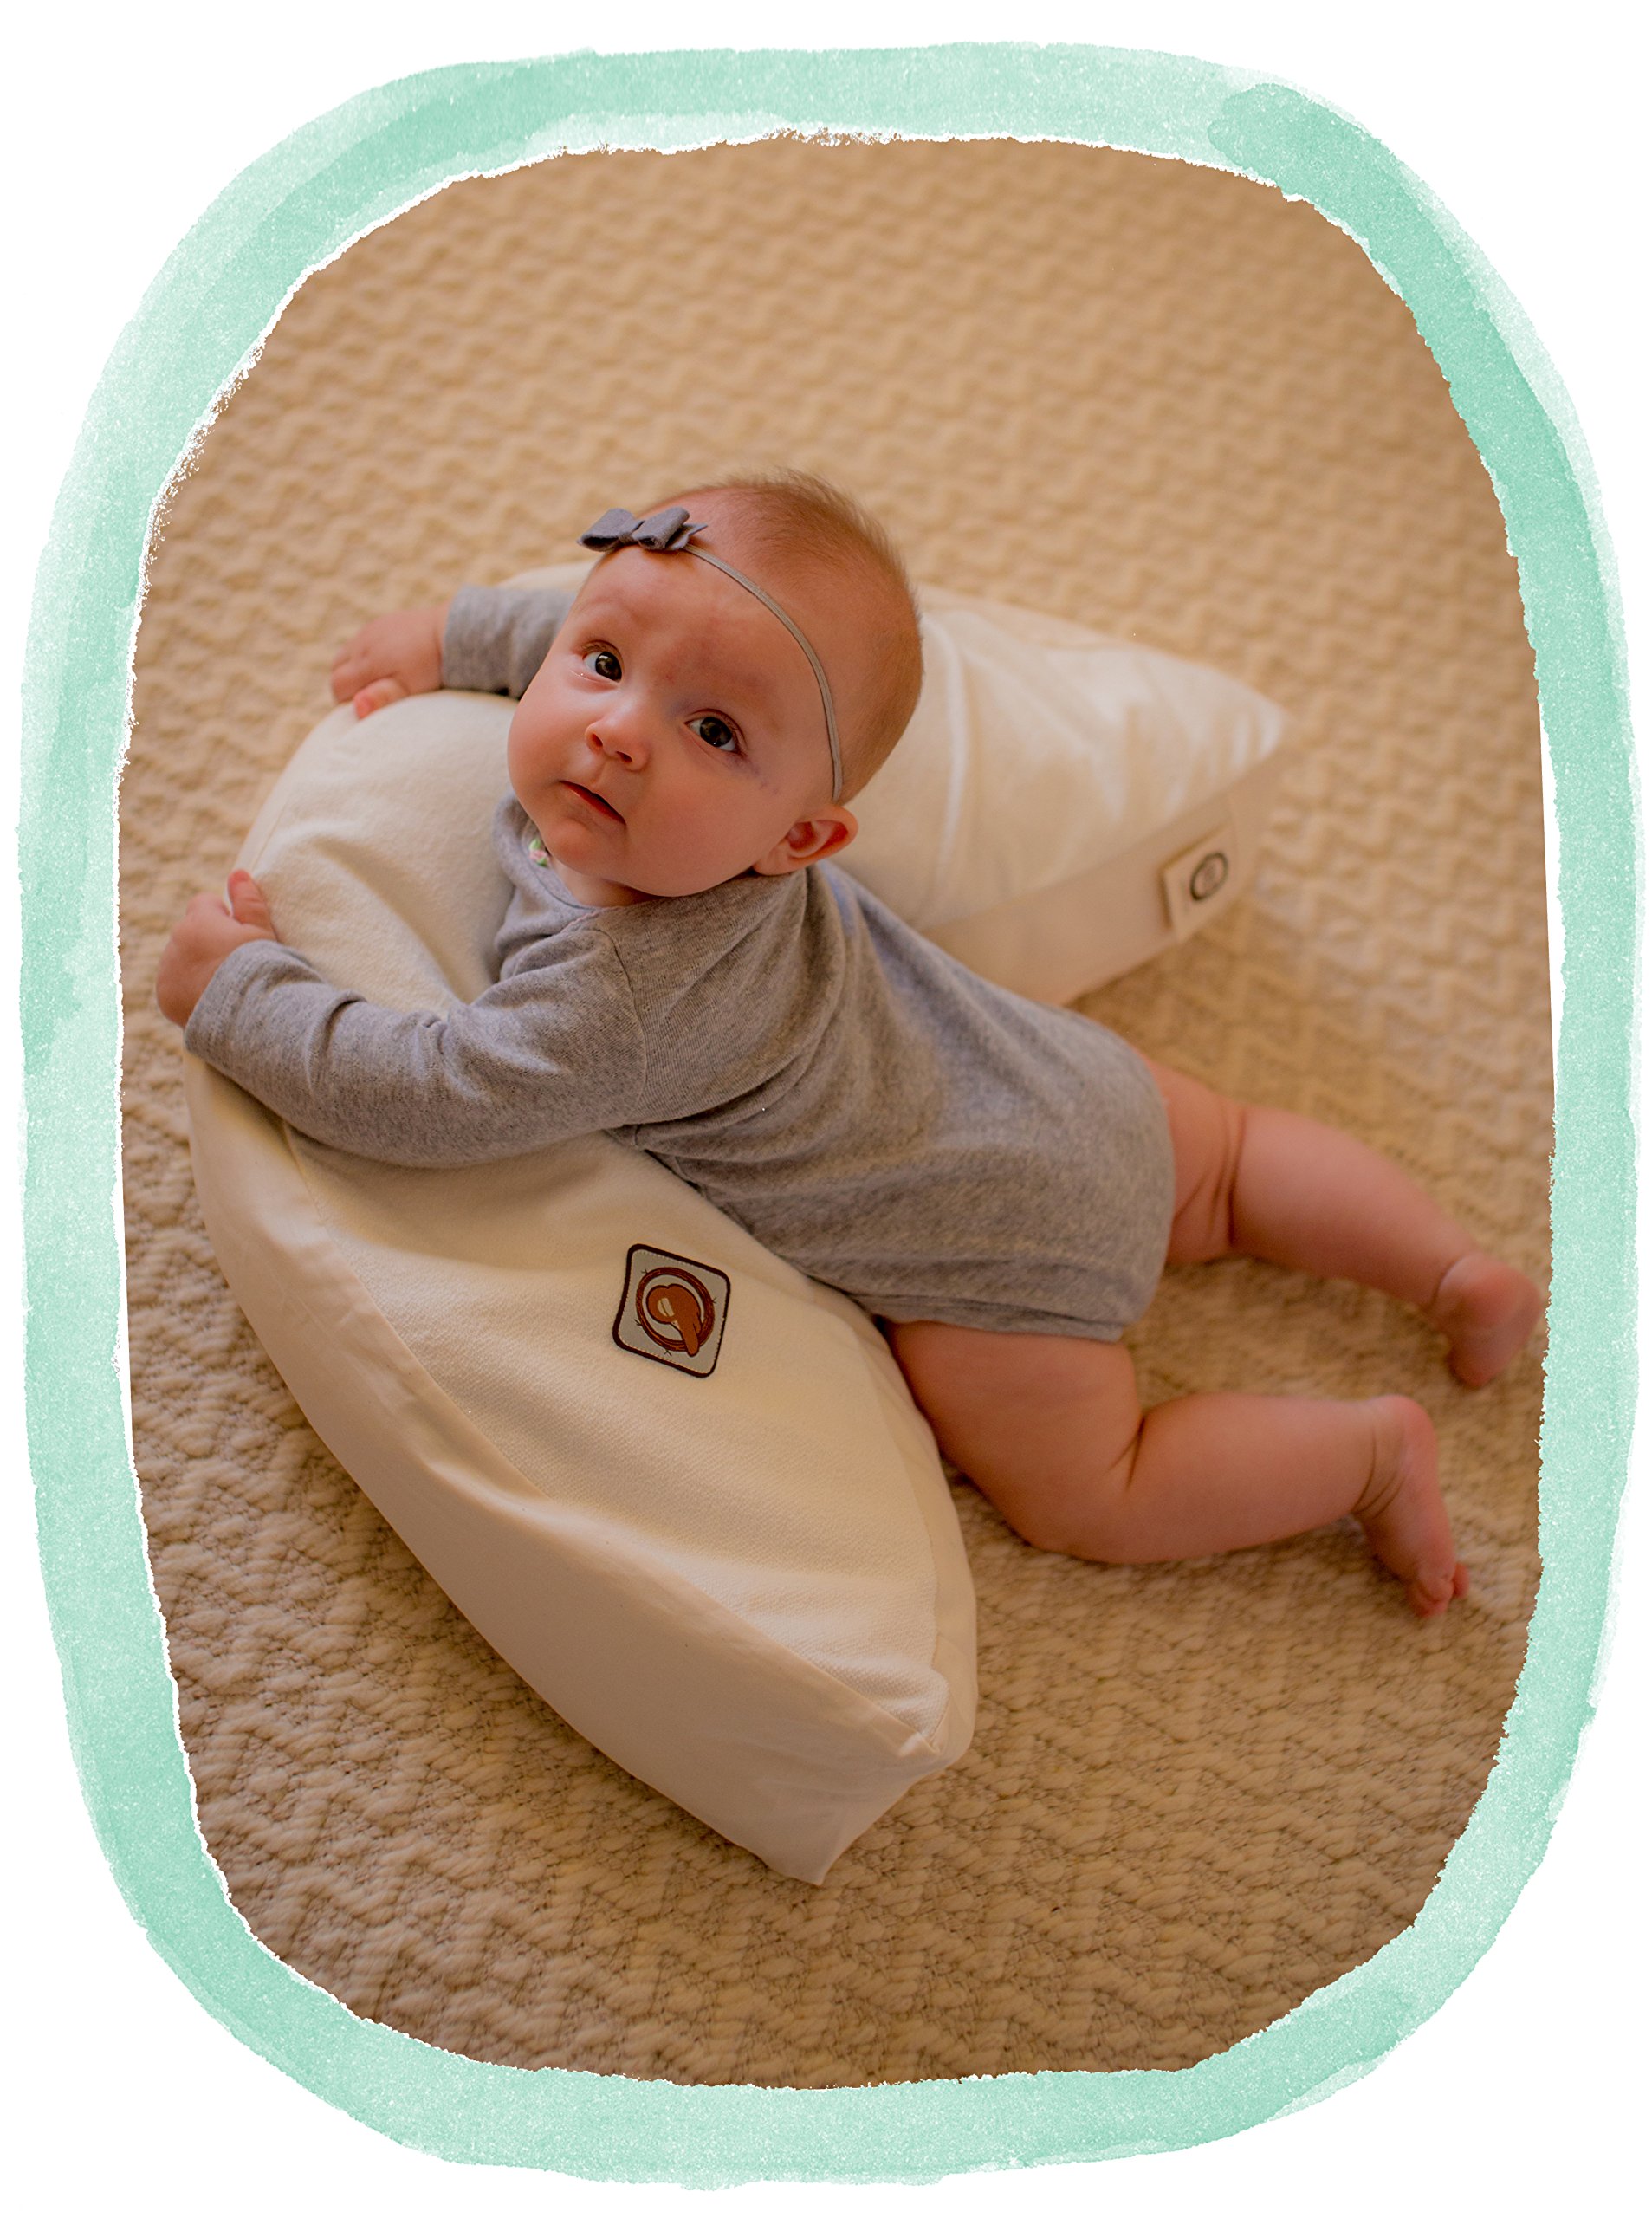 The Nesting Pillow- Organic Nursing Pillow with Washable Slipcover (Paloma)